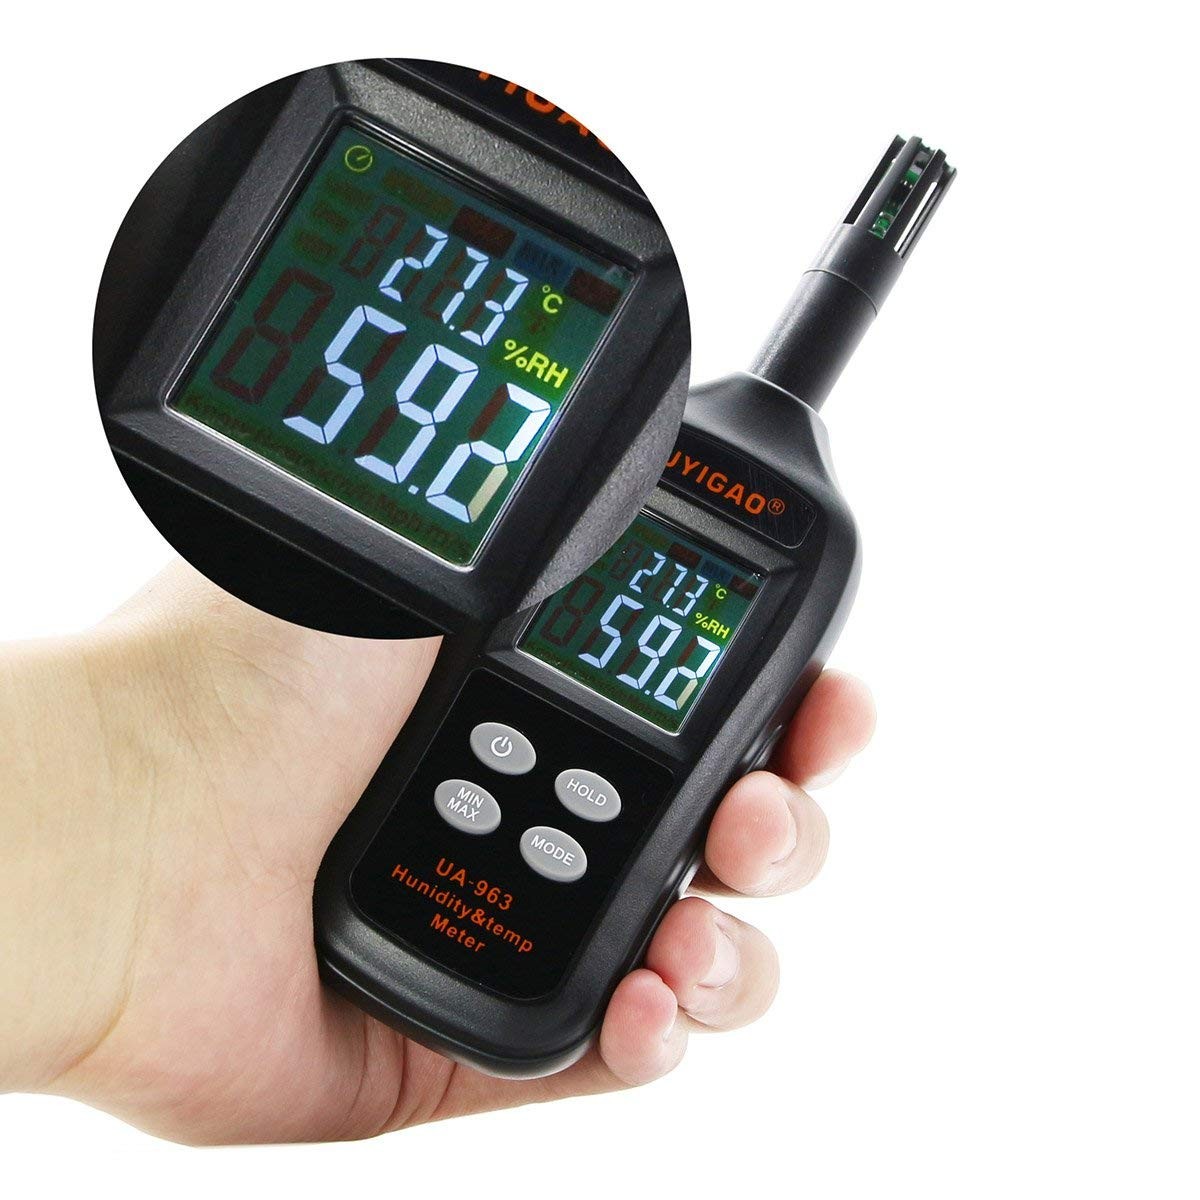 Temperature and Humidity Meter